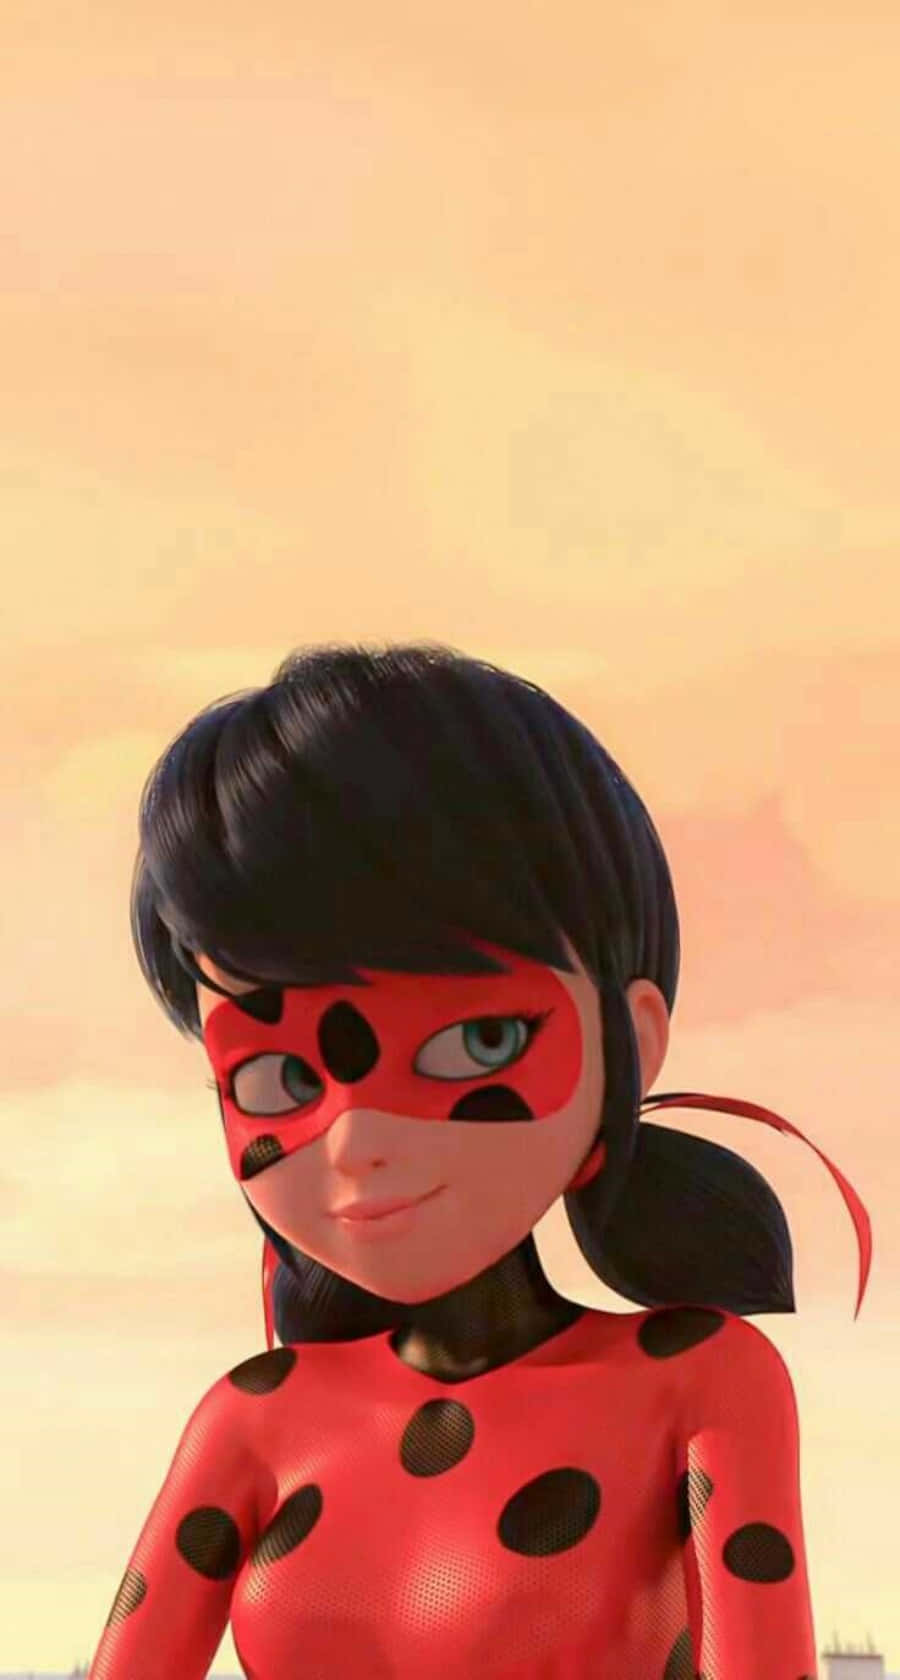 david camley recommends Show Me A Picture Of Ladybug From Miraculous